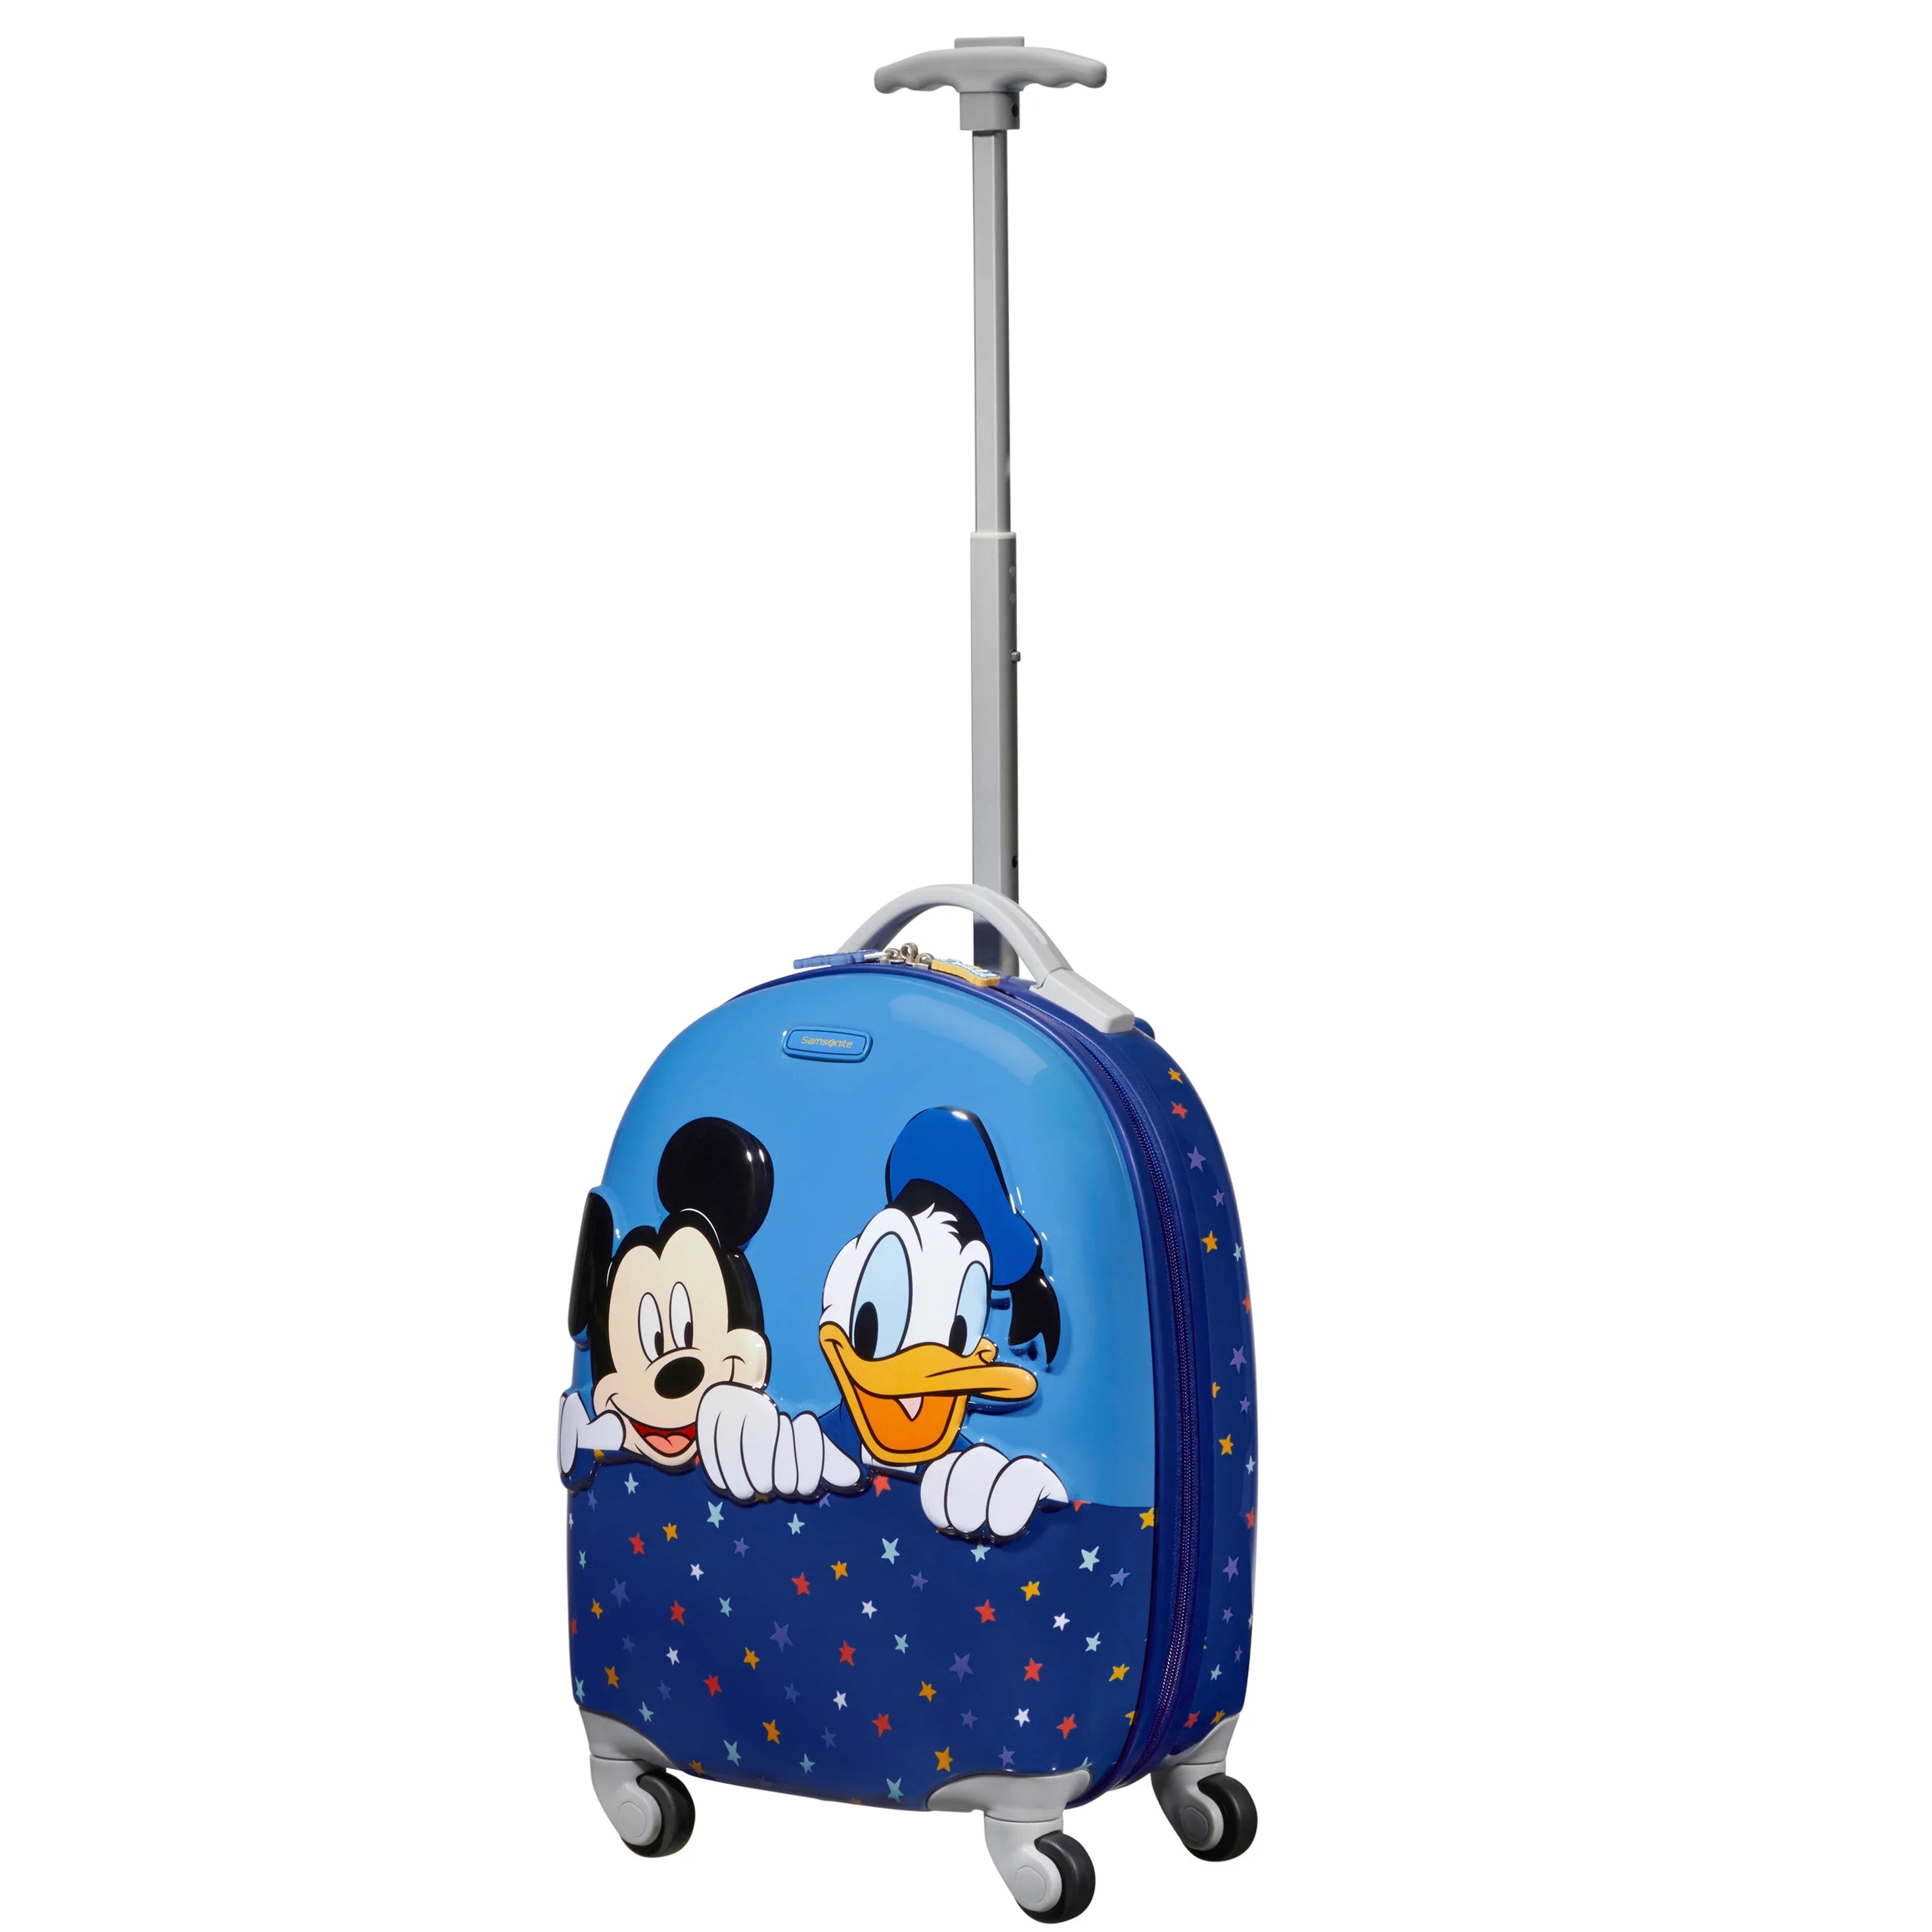 for companions and leisure Ulitmate 2.0 Disney - Sweet travel